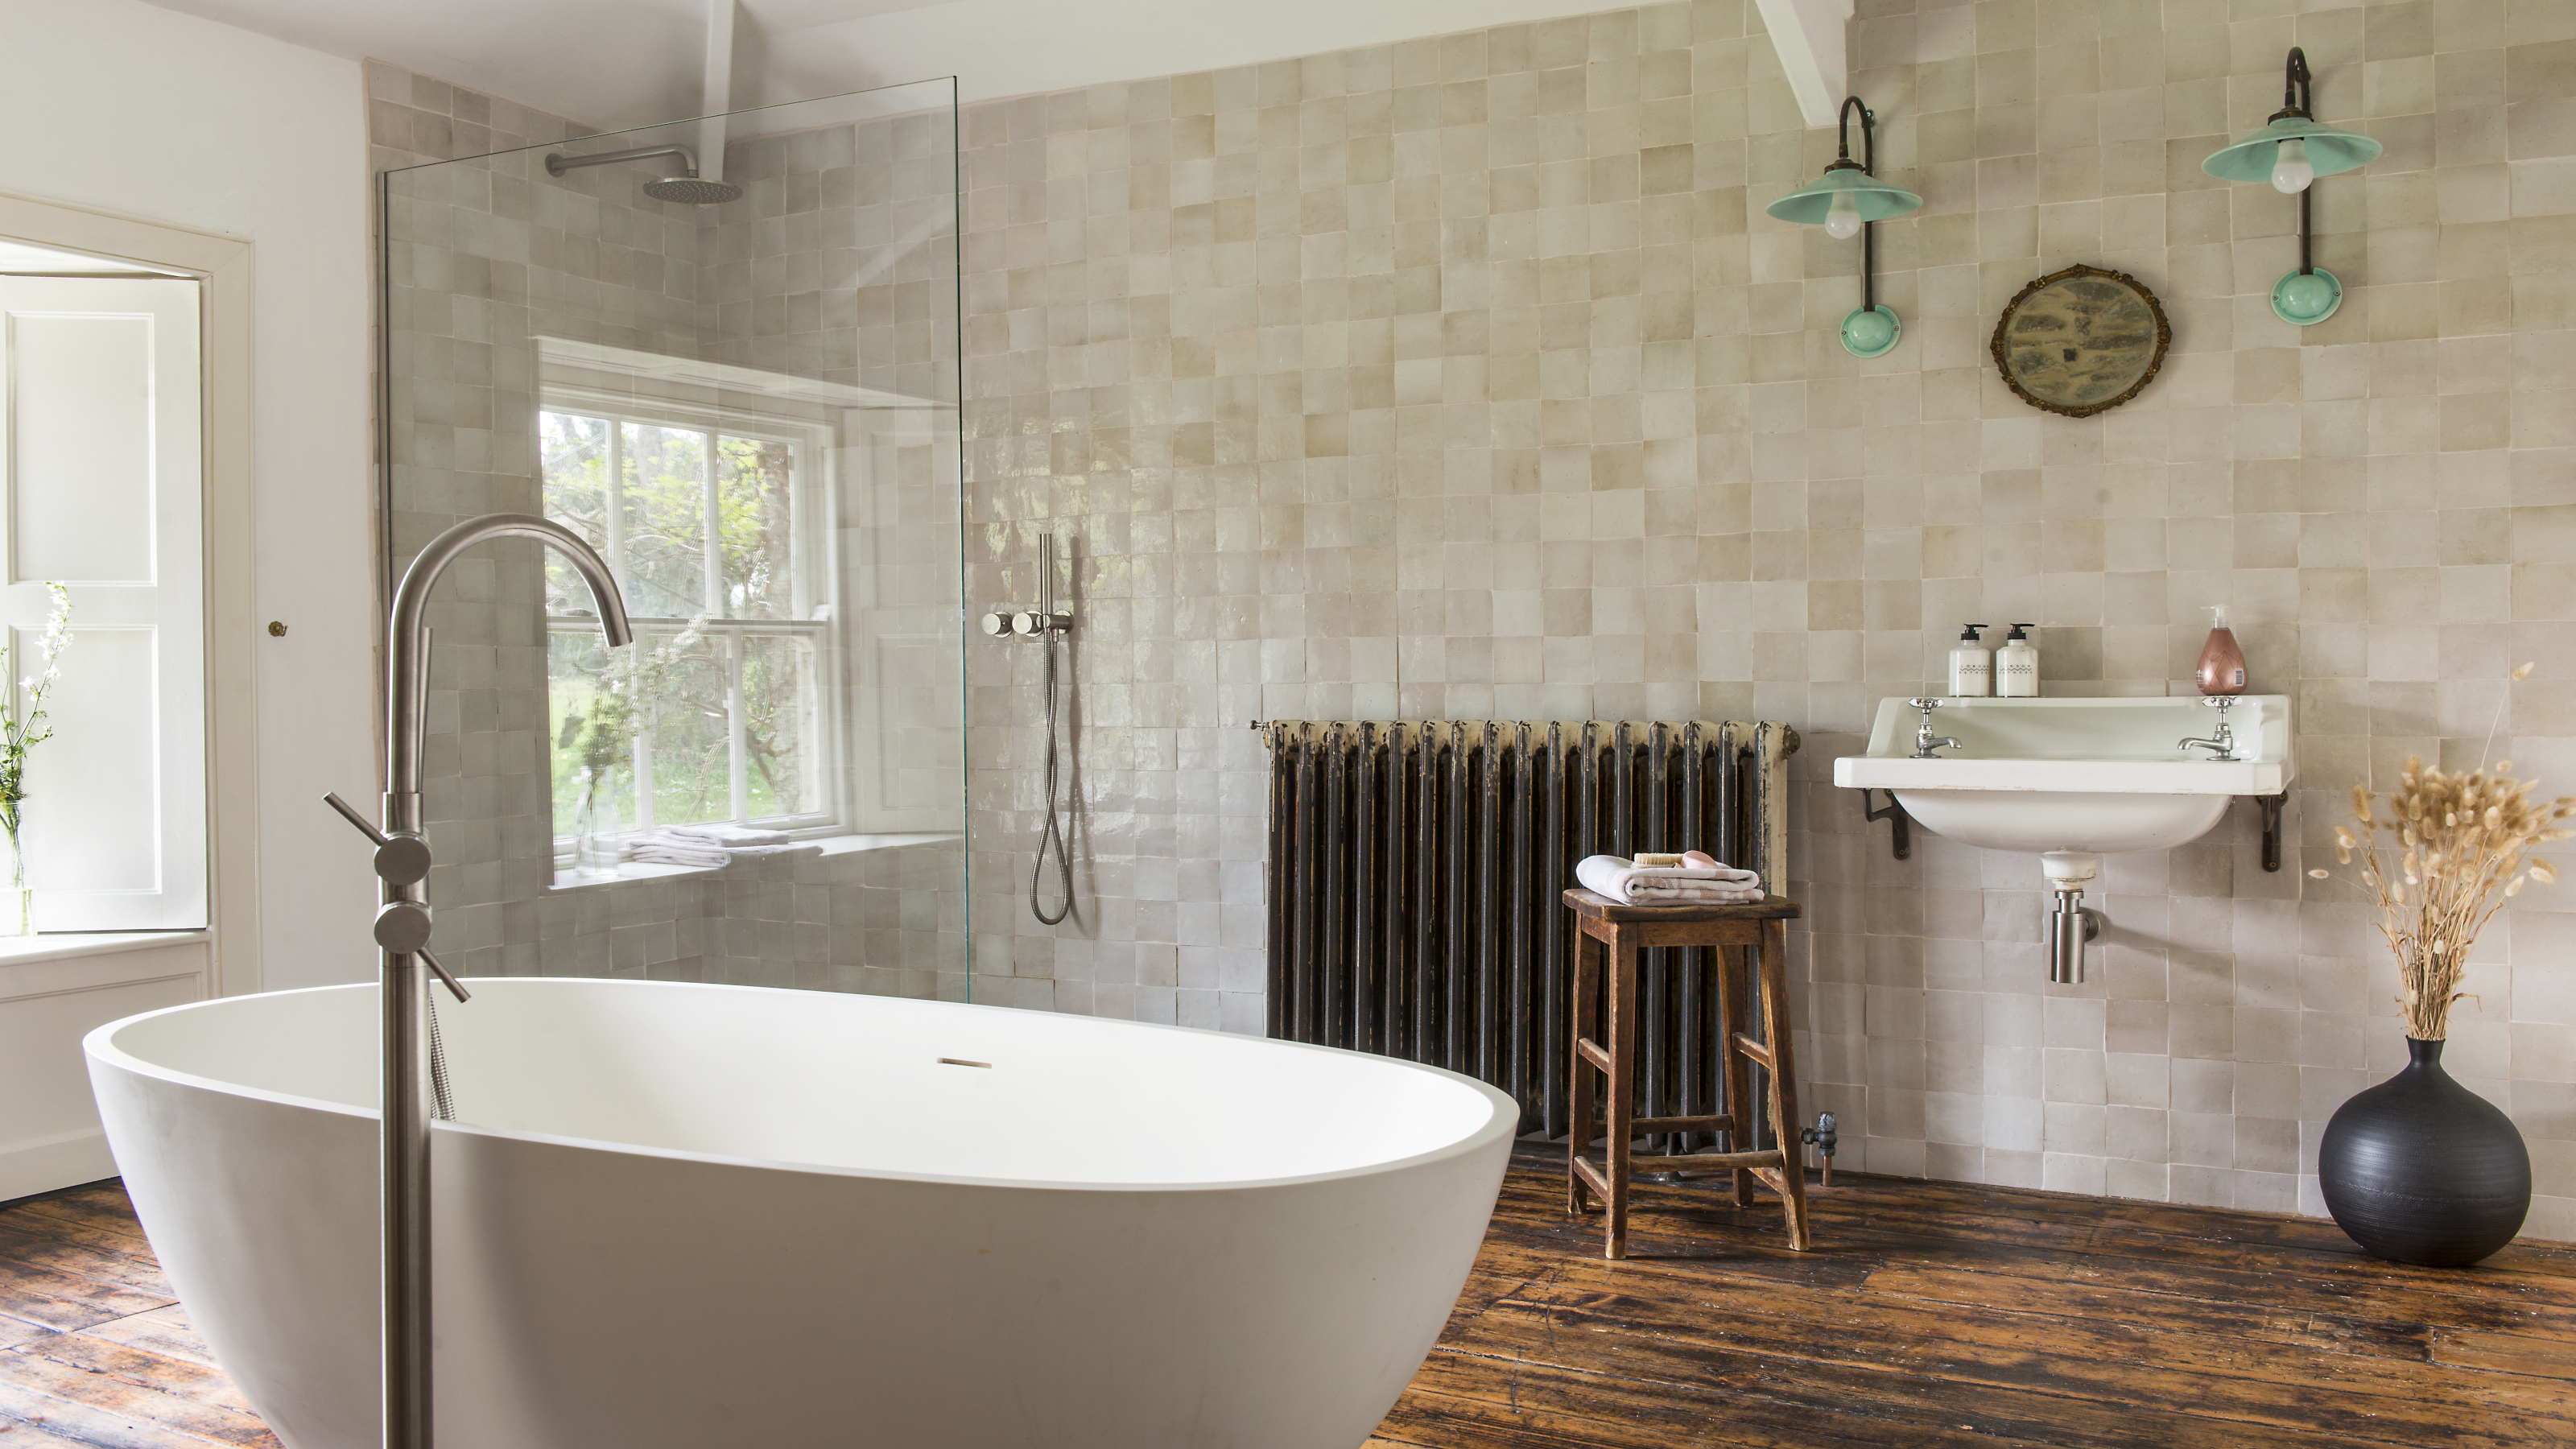 How Colored Grout Can Make Your Bathroom Look More Expensive